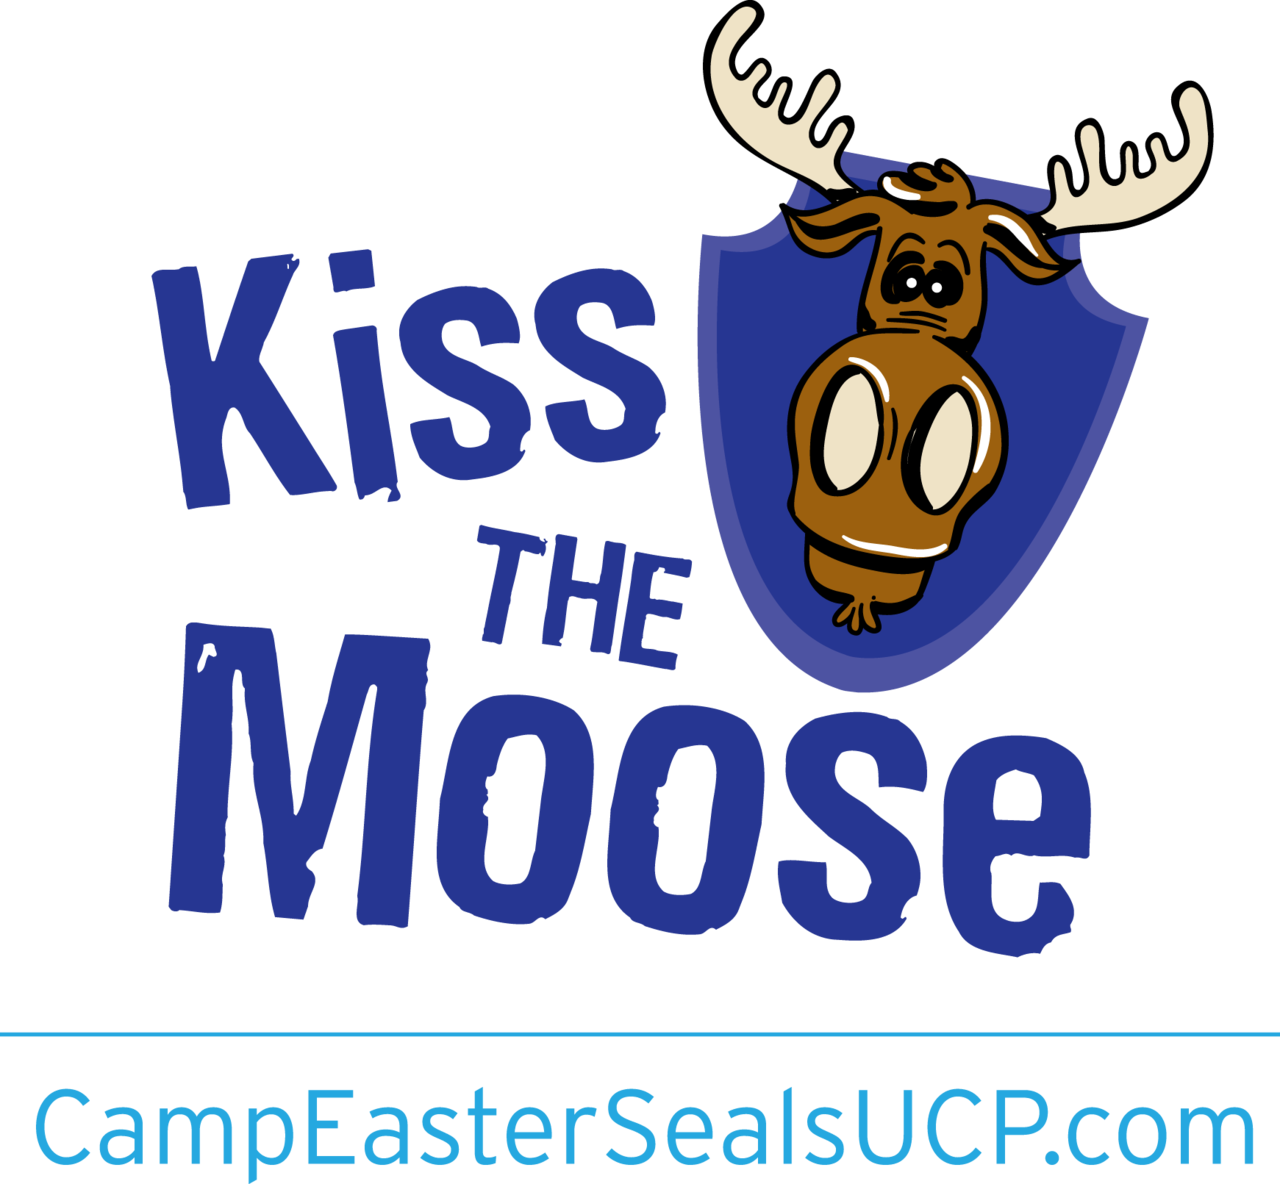 Camp Easter Seals UCP